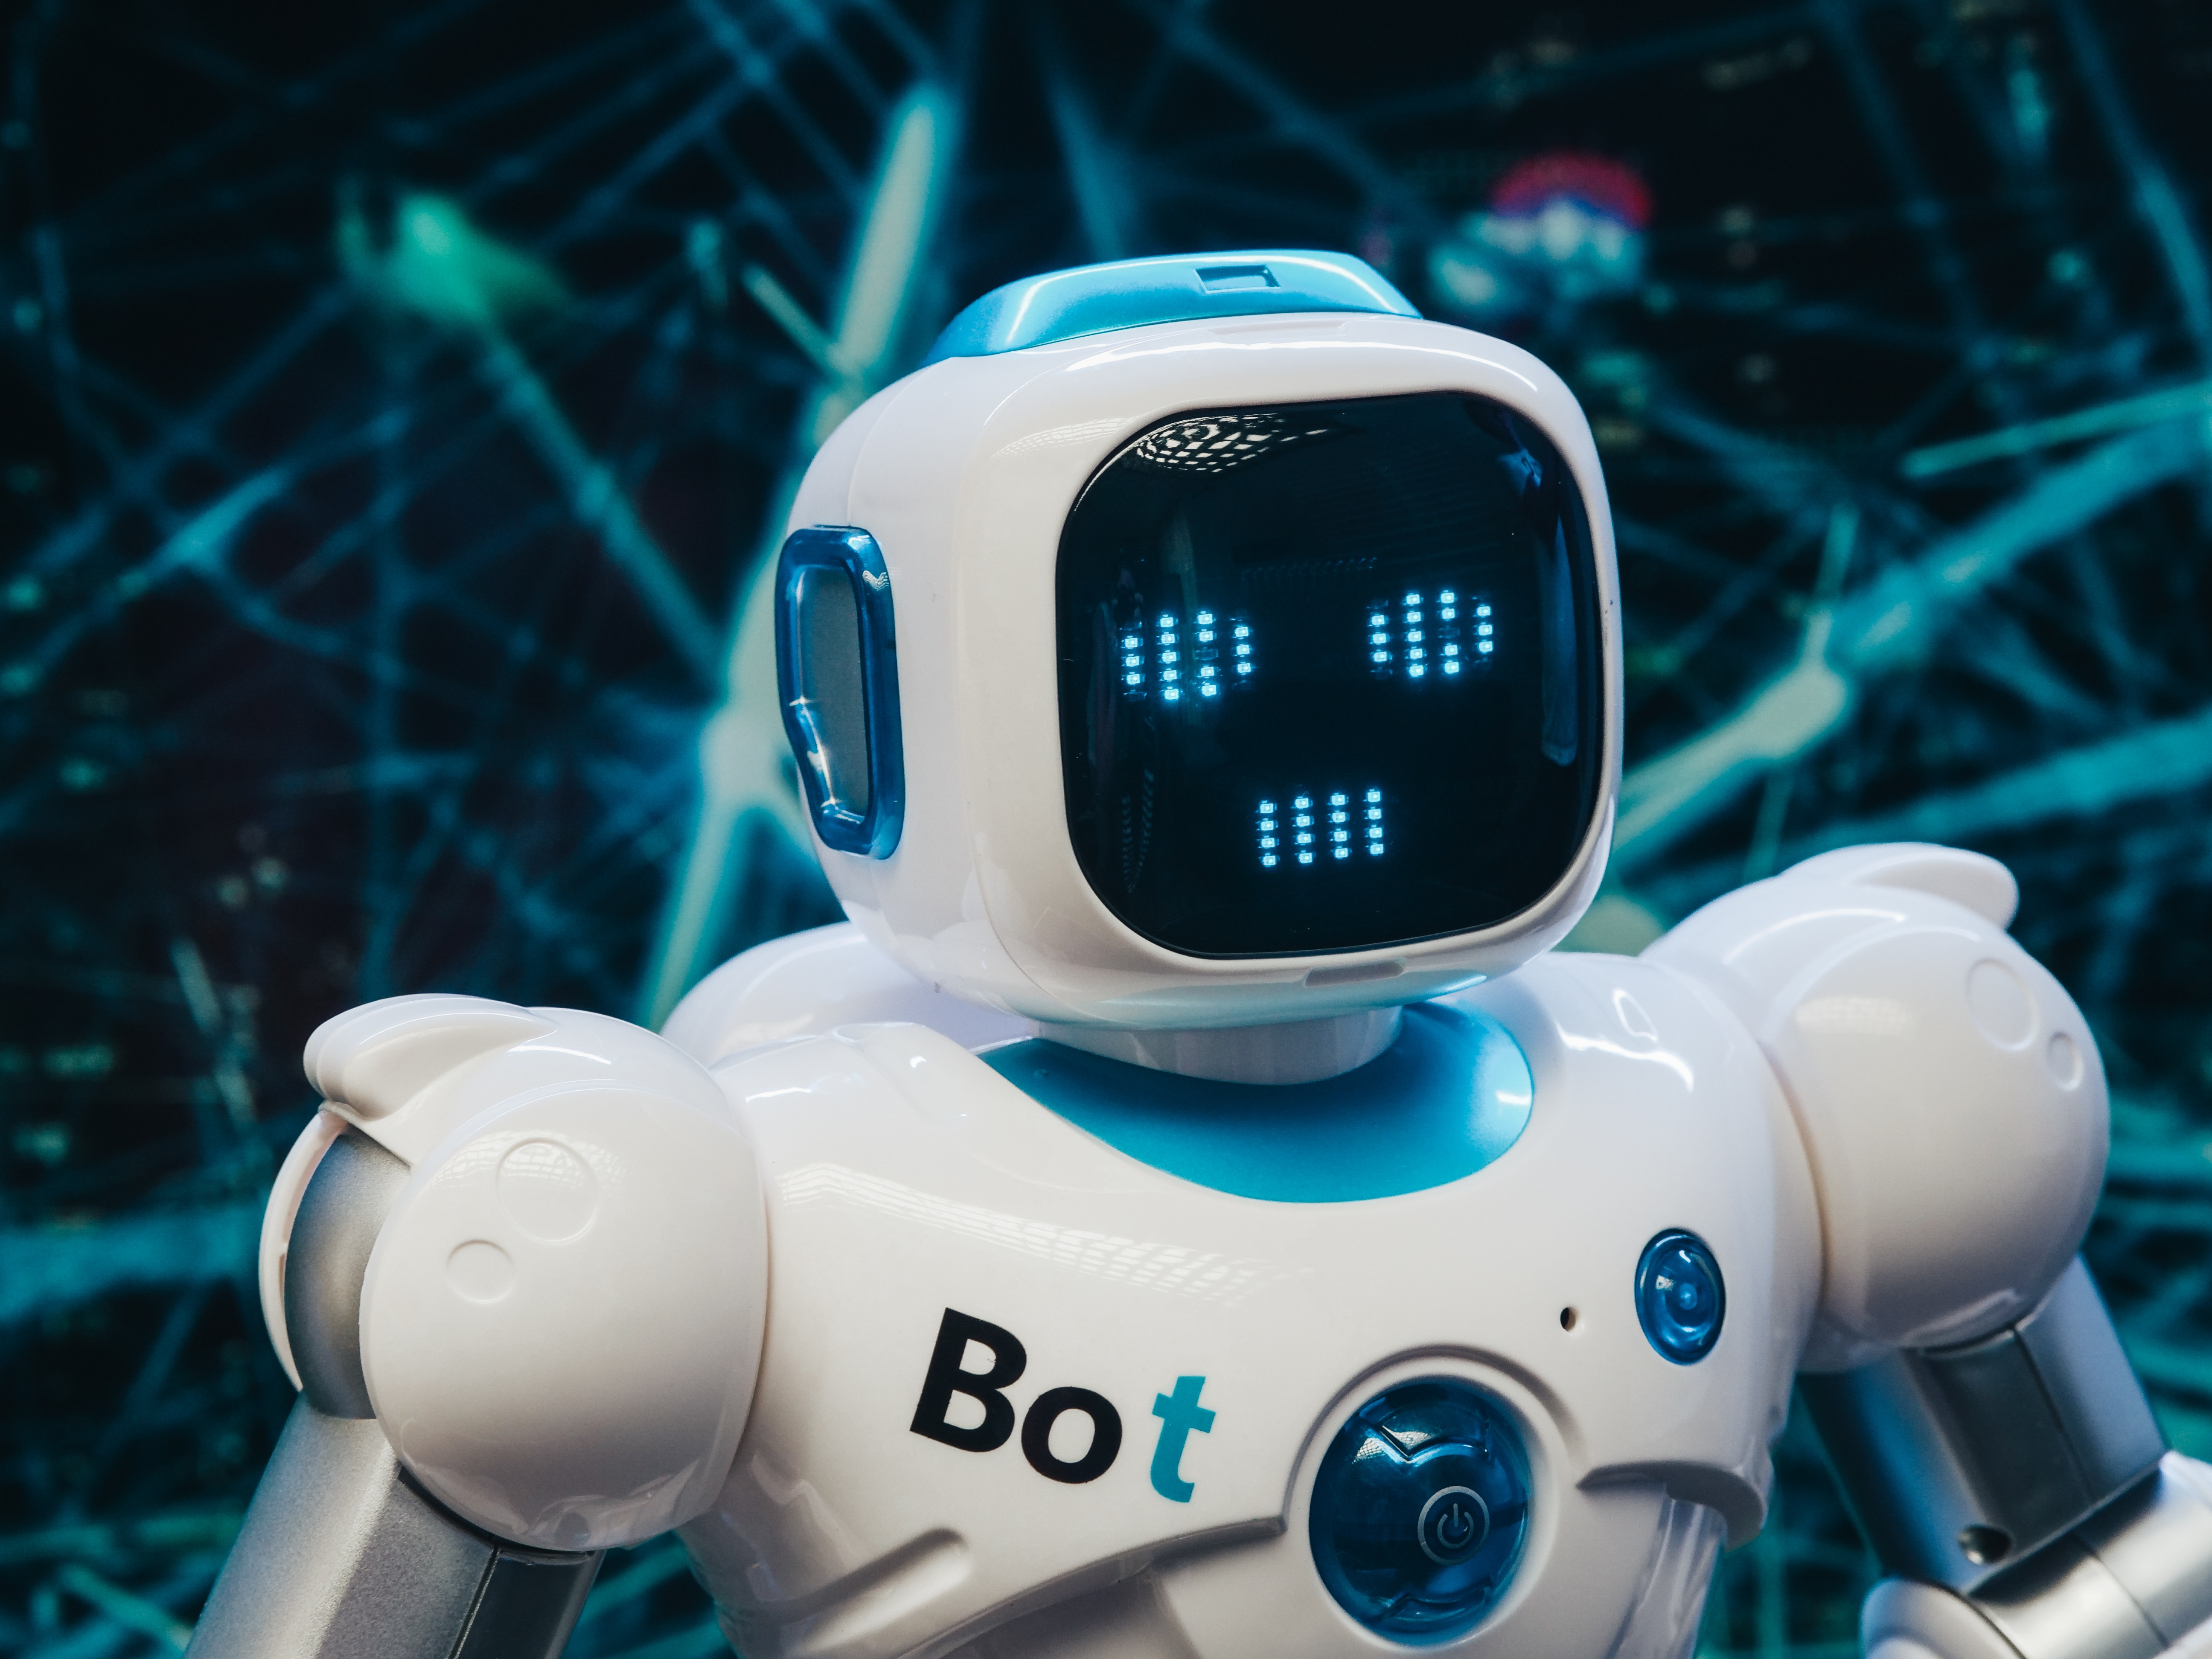 10 Best Bots Available On The Right Now